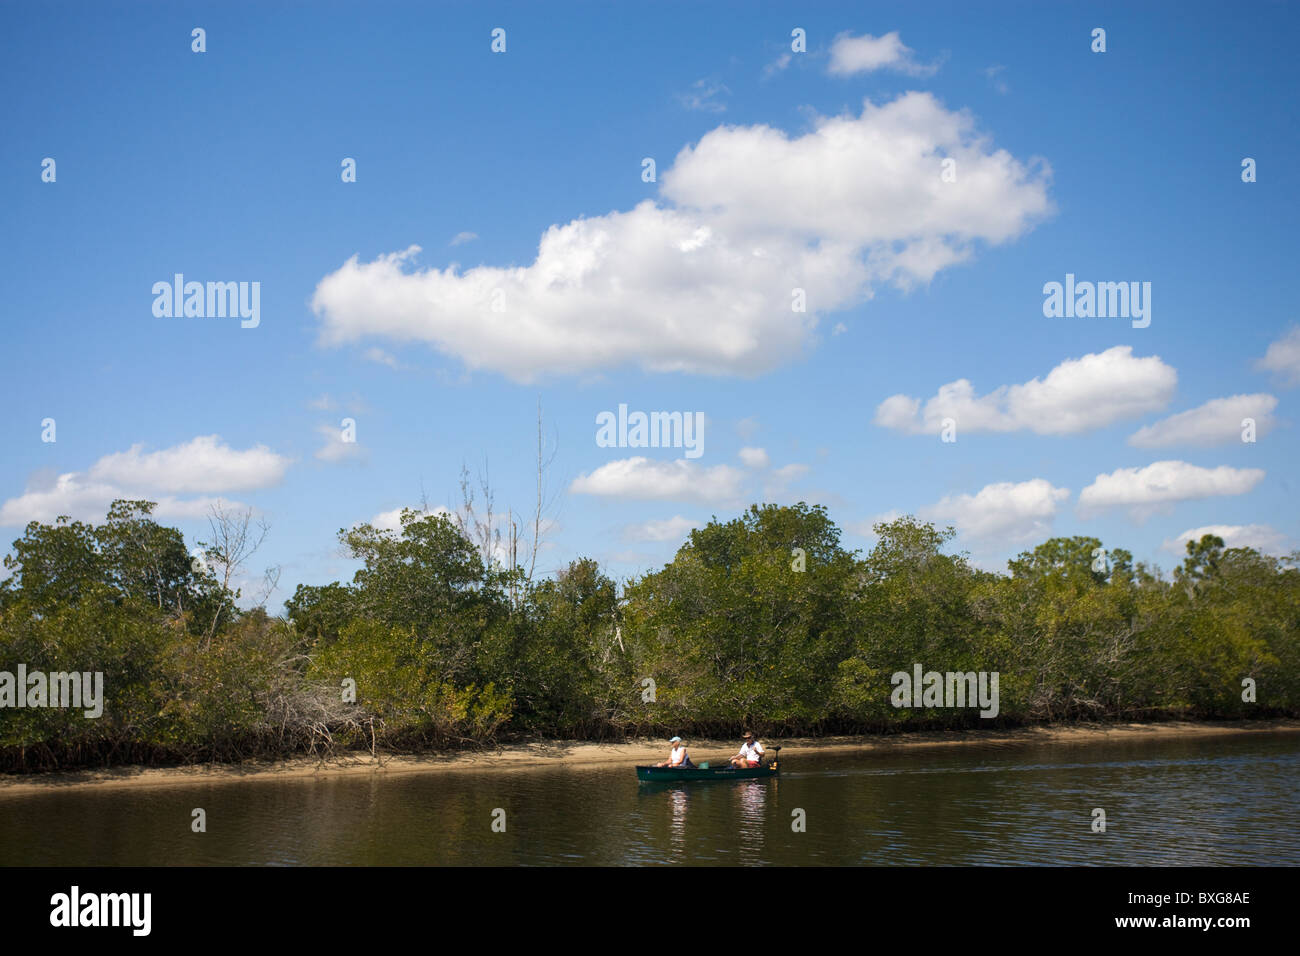 Tourists on vacation at Ten Thousand Islands in Florida Everglades, USA Stock Photo